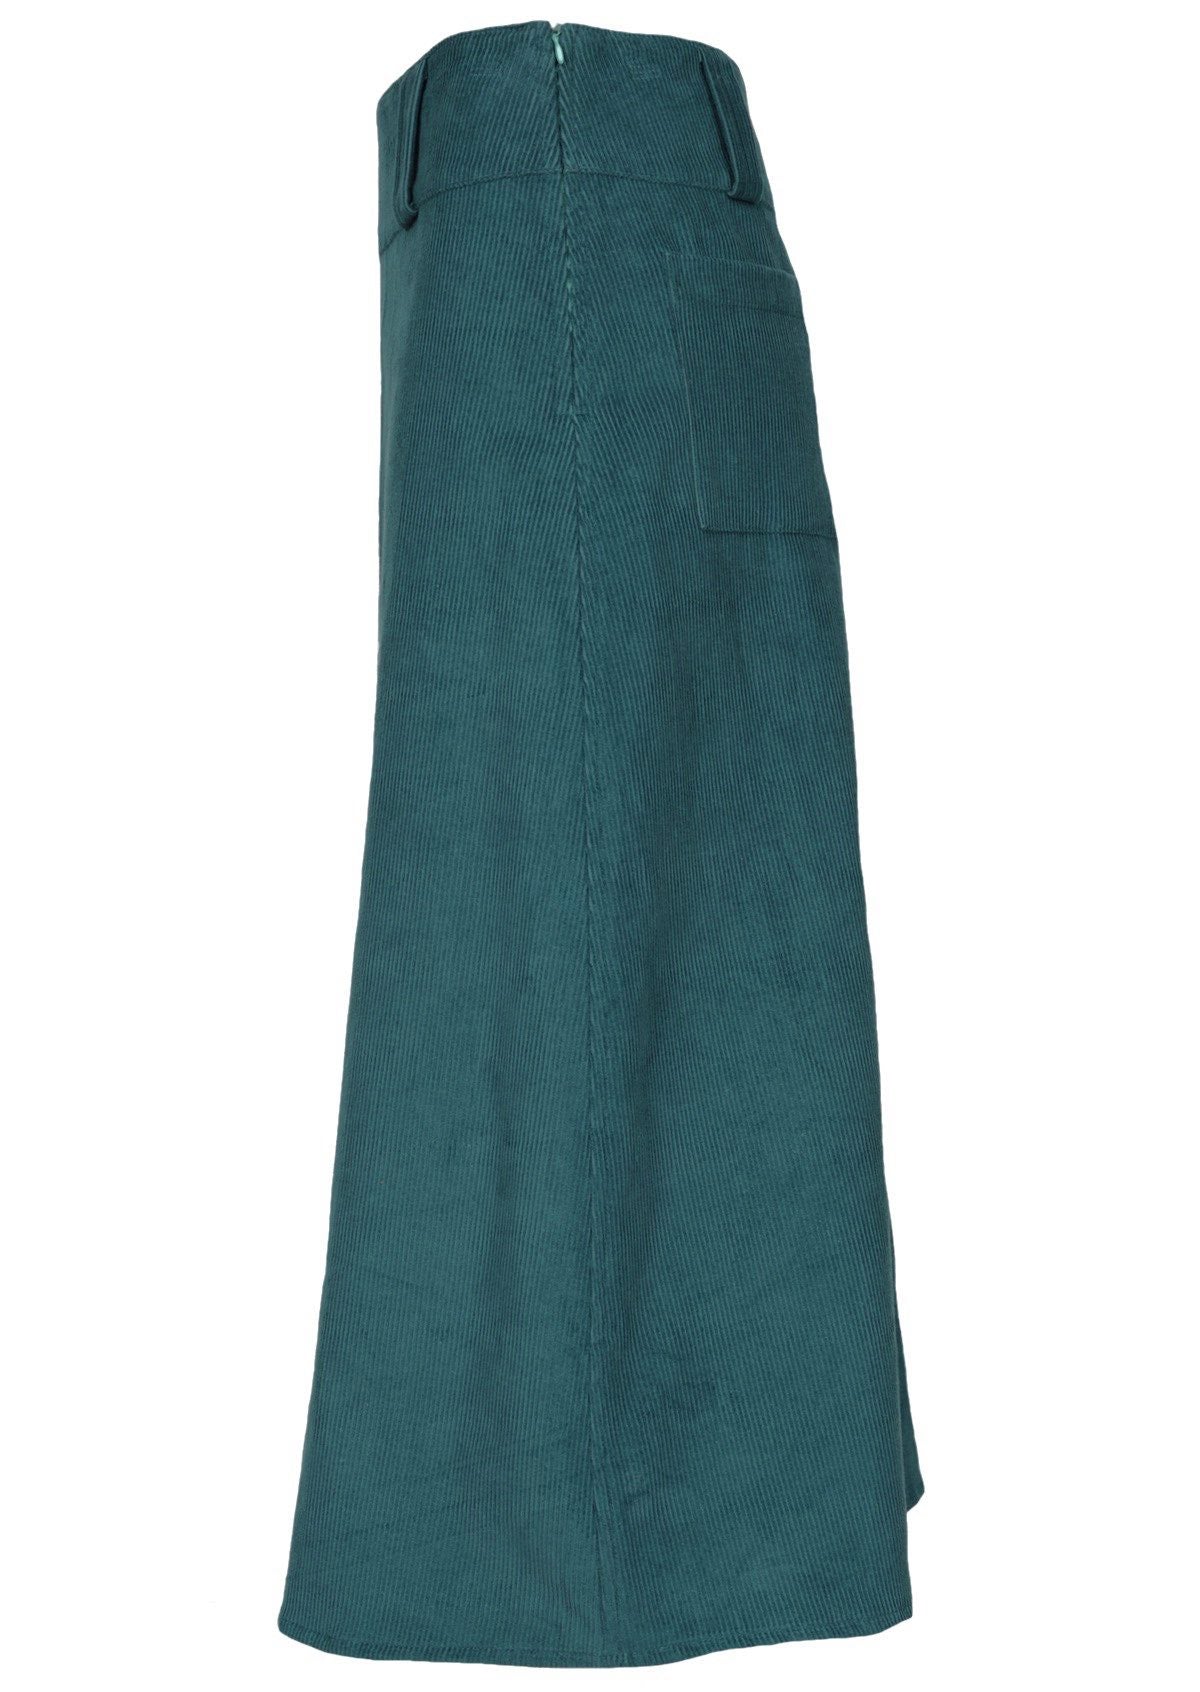 This belt loop skirt has an a-line structure and is made of 100% cotton corduroy. 